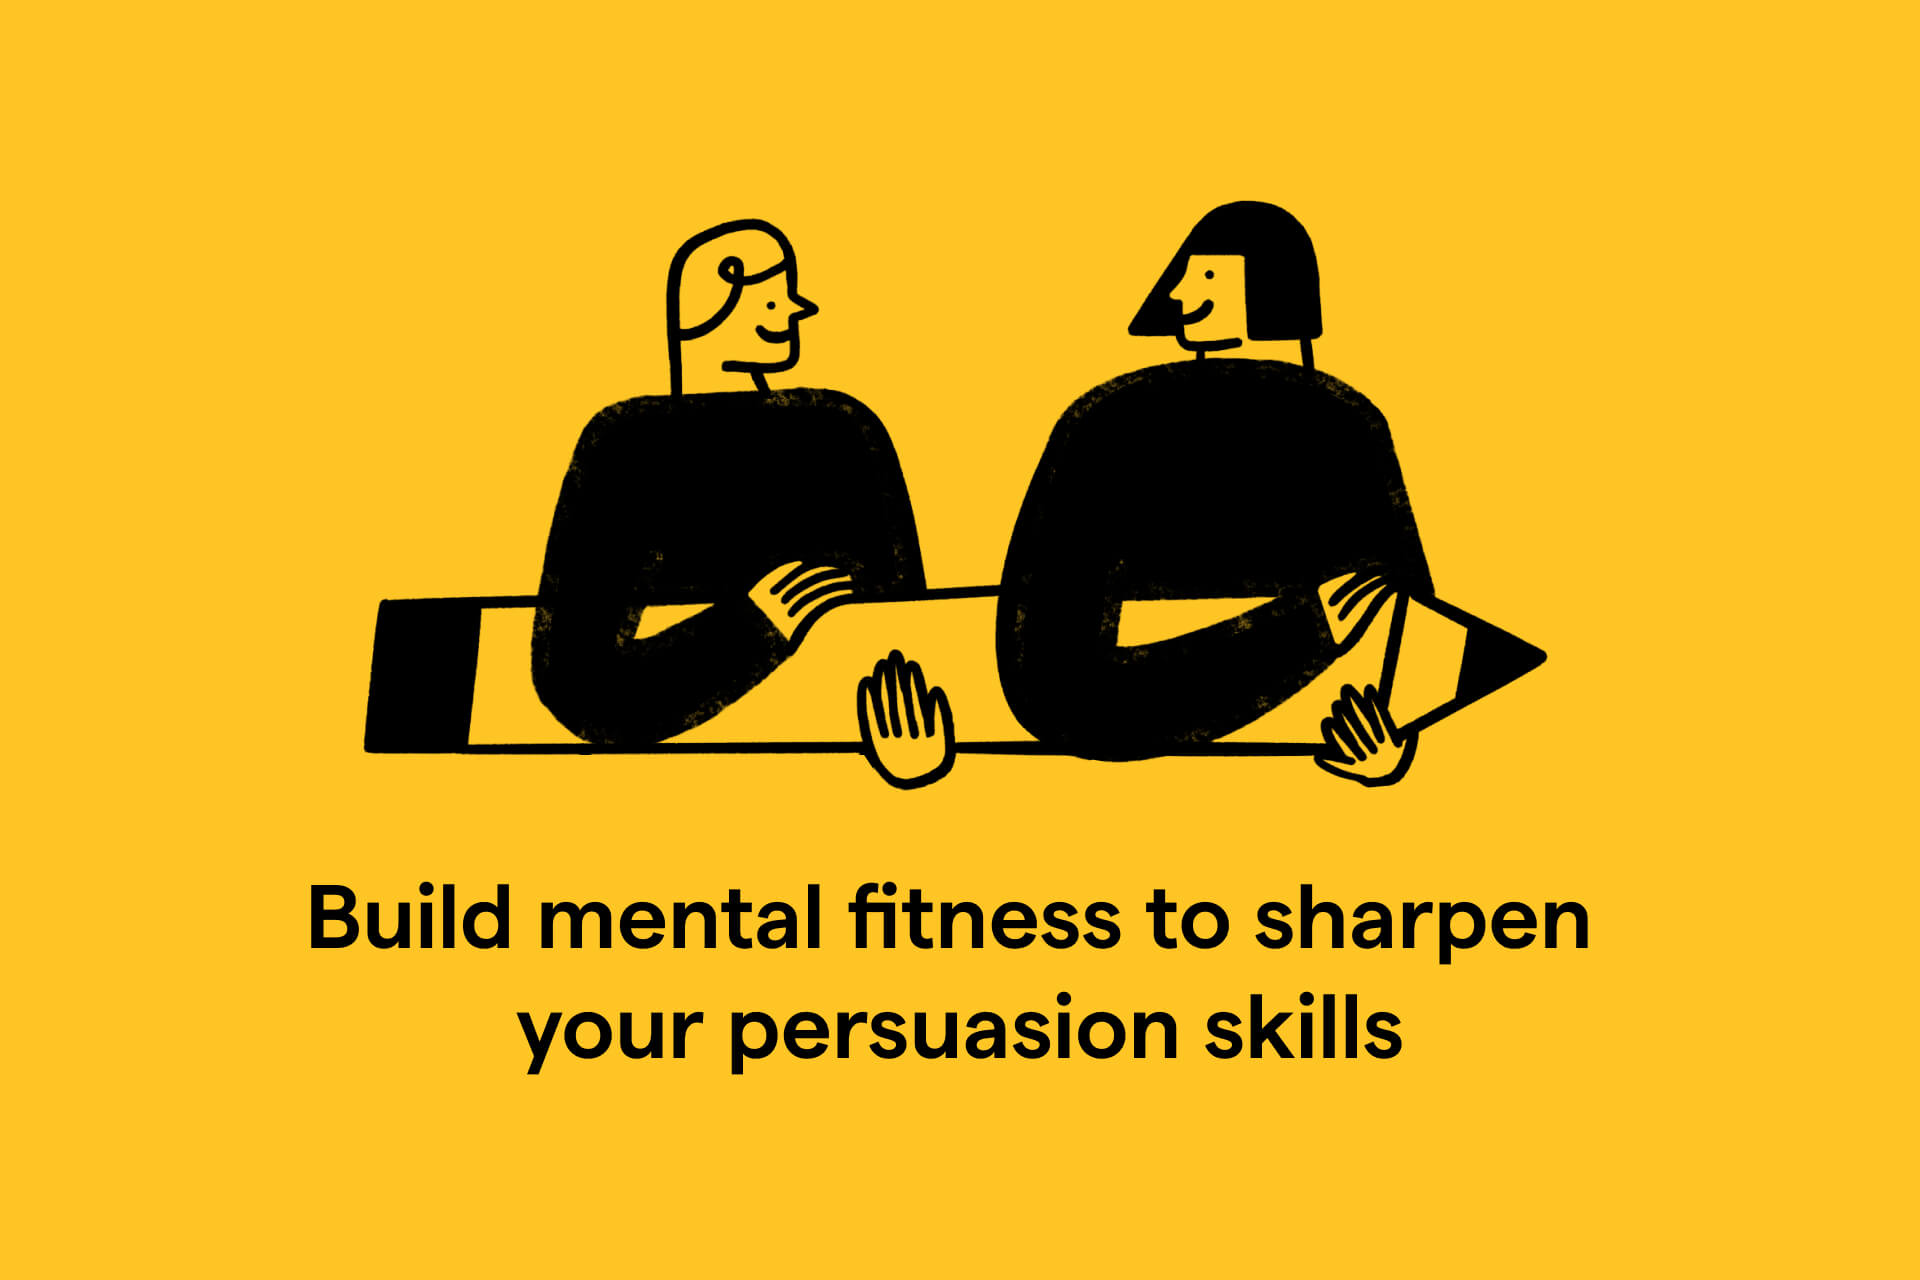 Build mental fitness to sharpen your persuasion skills